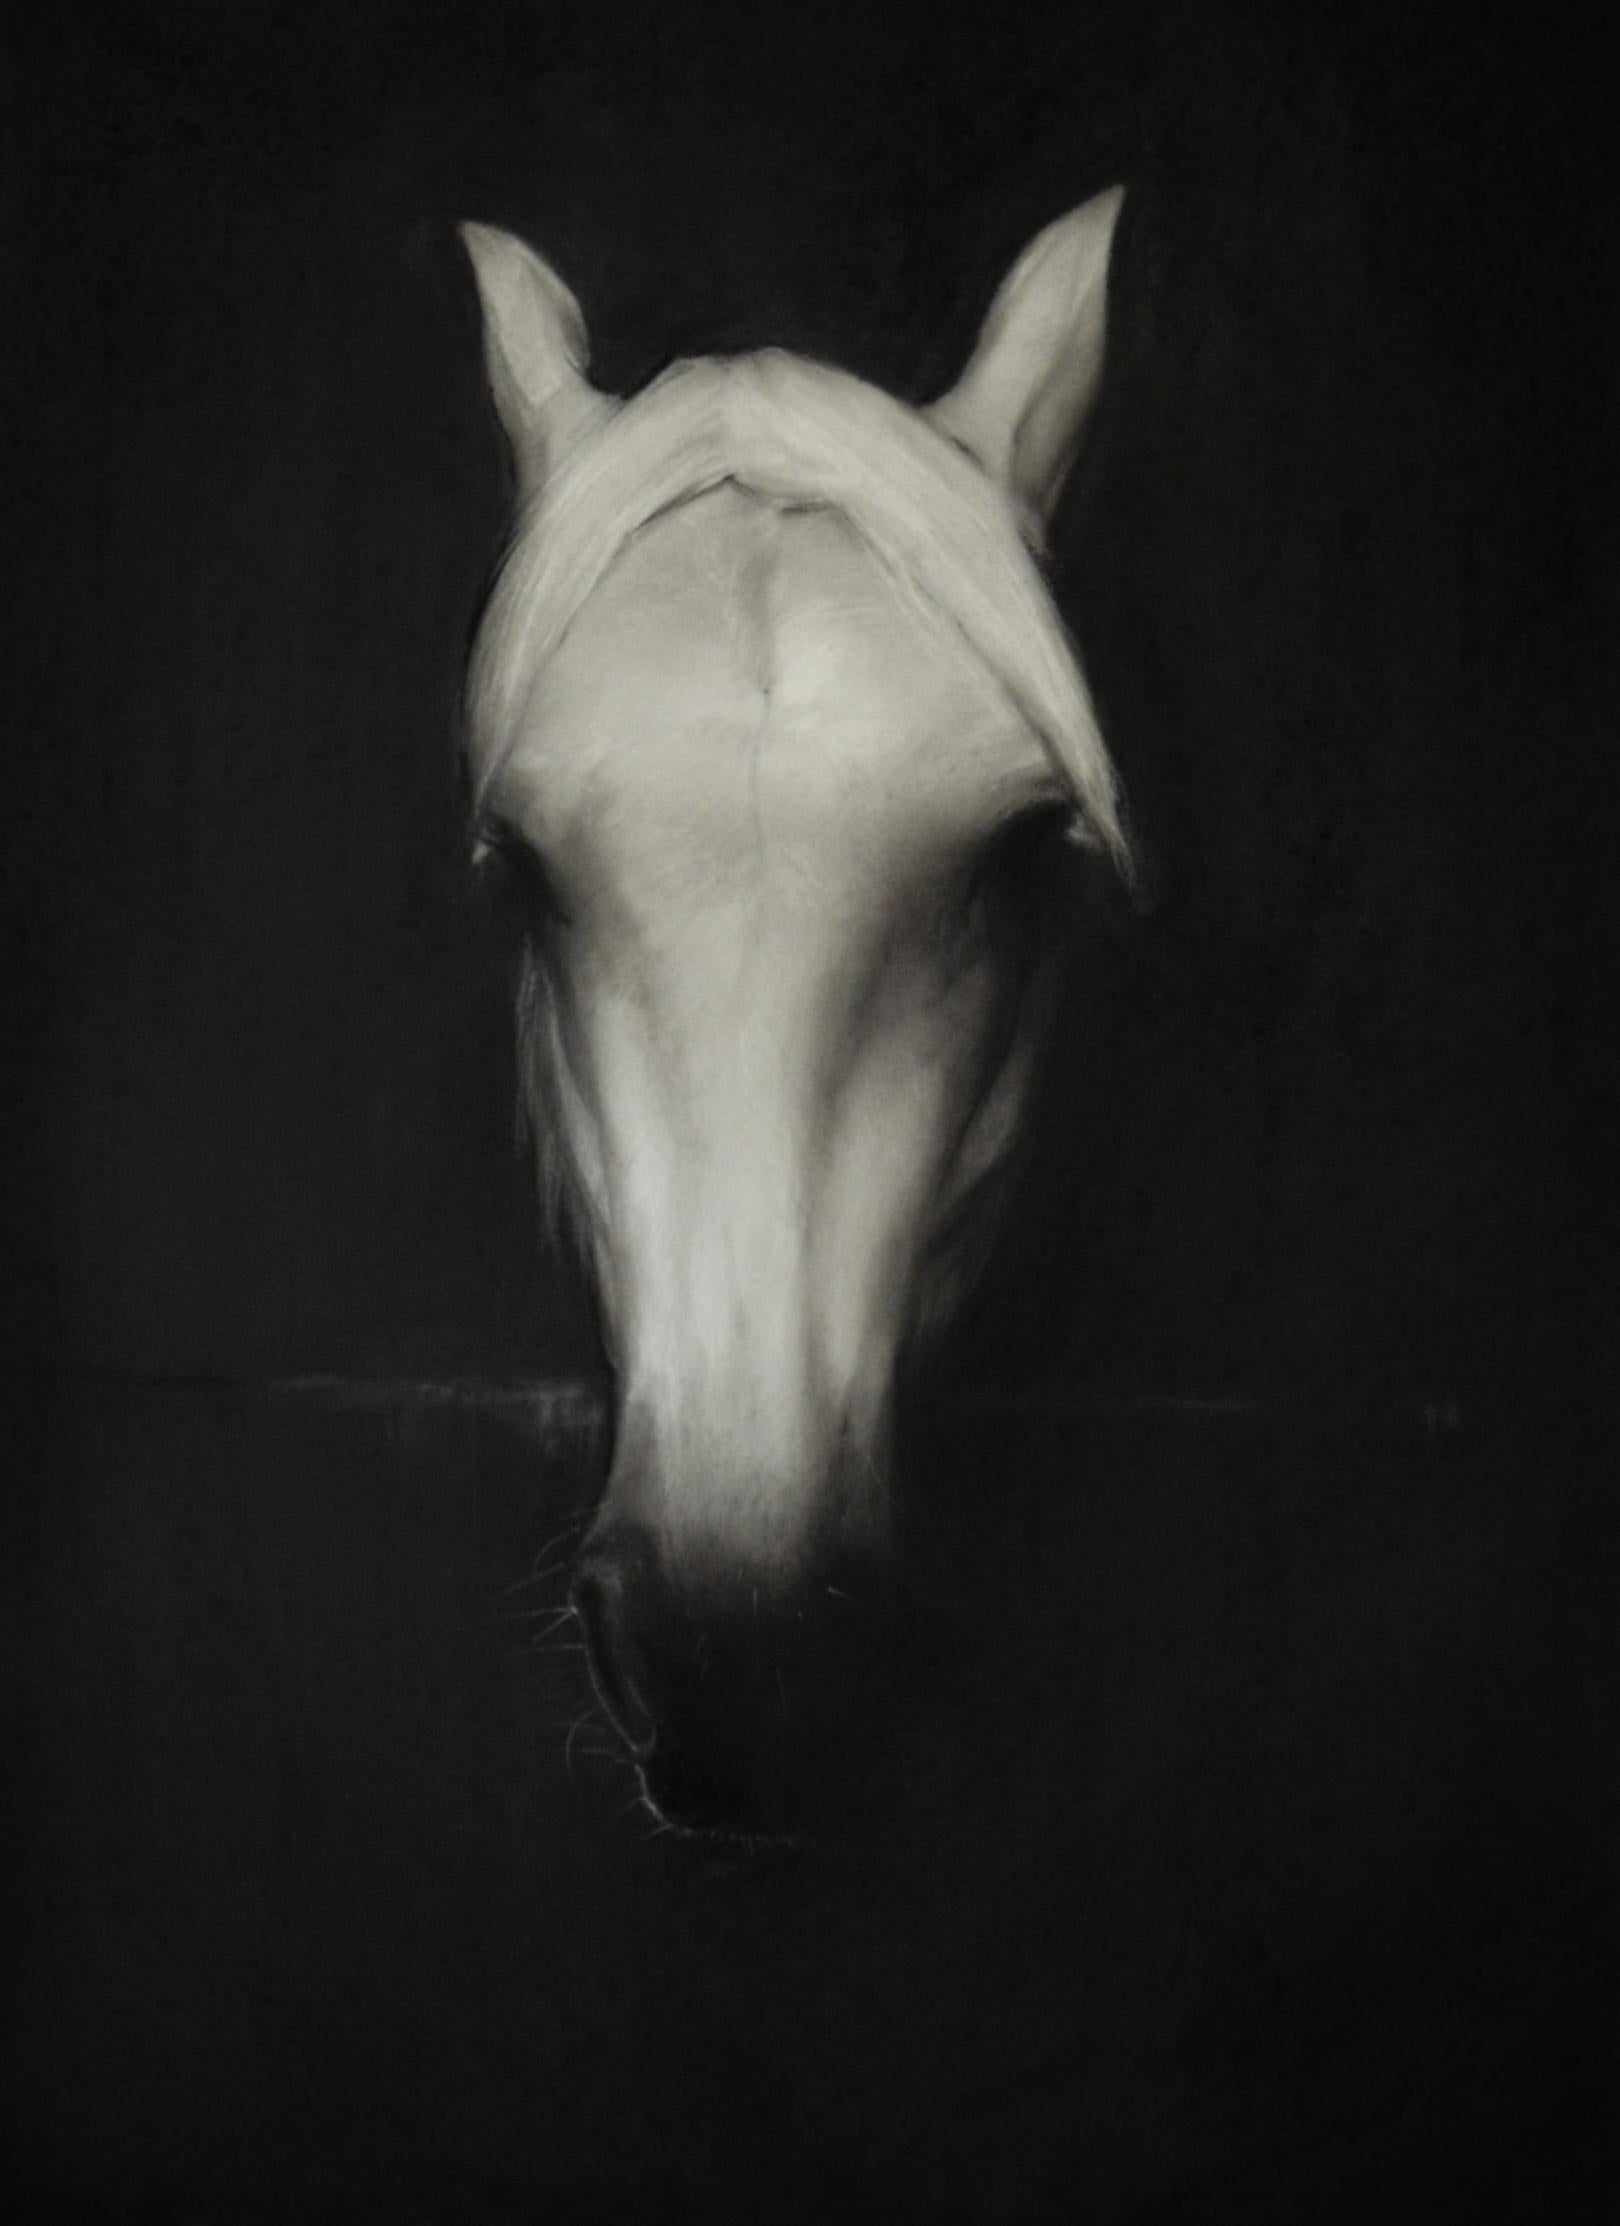 Rosanna Gaddoni Animal Art - Fairy- 21st Century Contemporary Charcoal drawing of the head of a horse